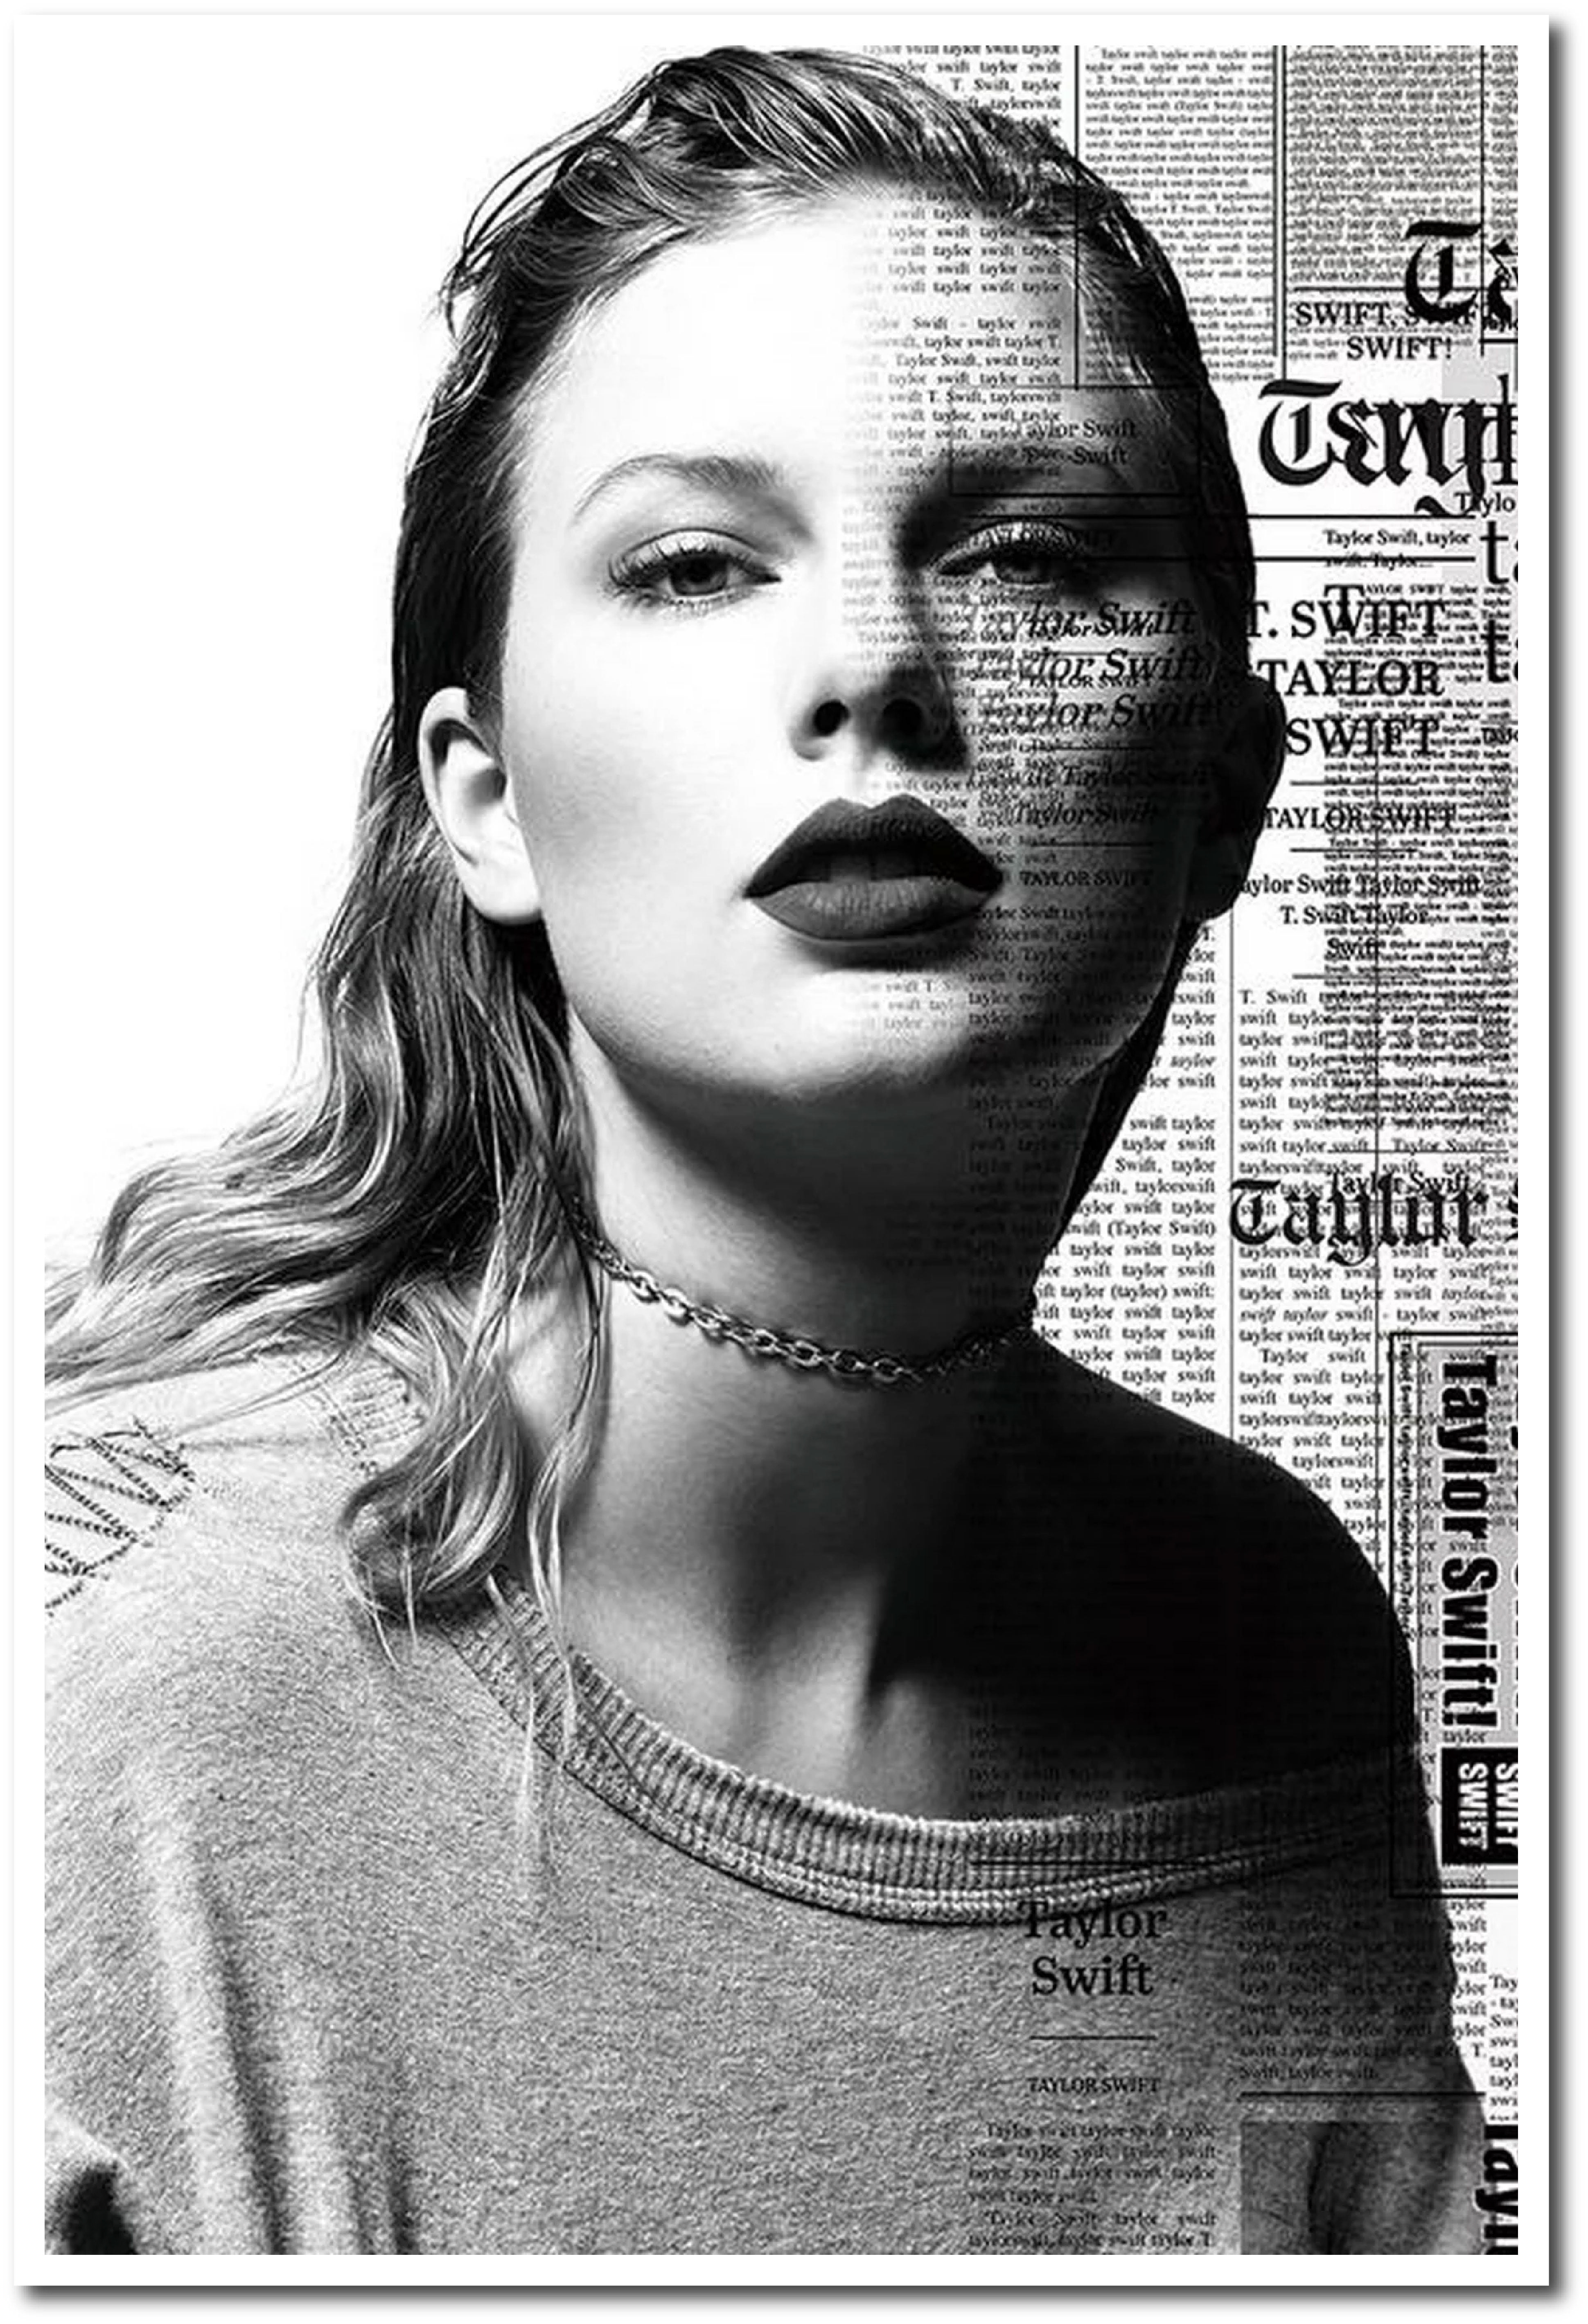 Taylor Album Swift Poster Lover Canvas Poster Wall Art Print Painting  Decorations for Home Bedroom Living Room Gifts Unframe:16x24inch(40x60cm)